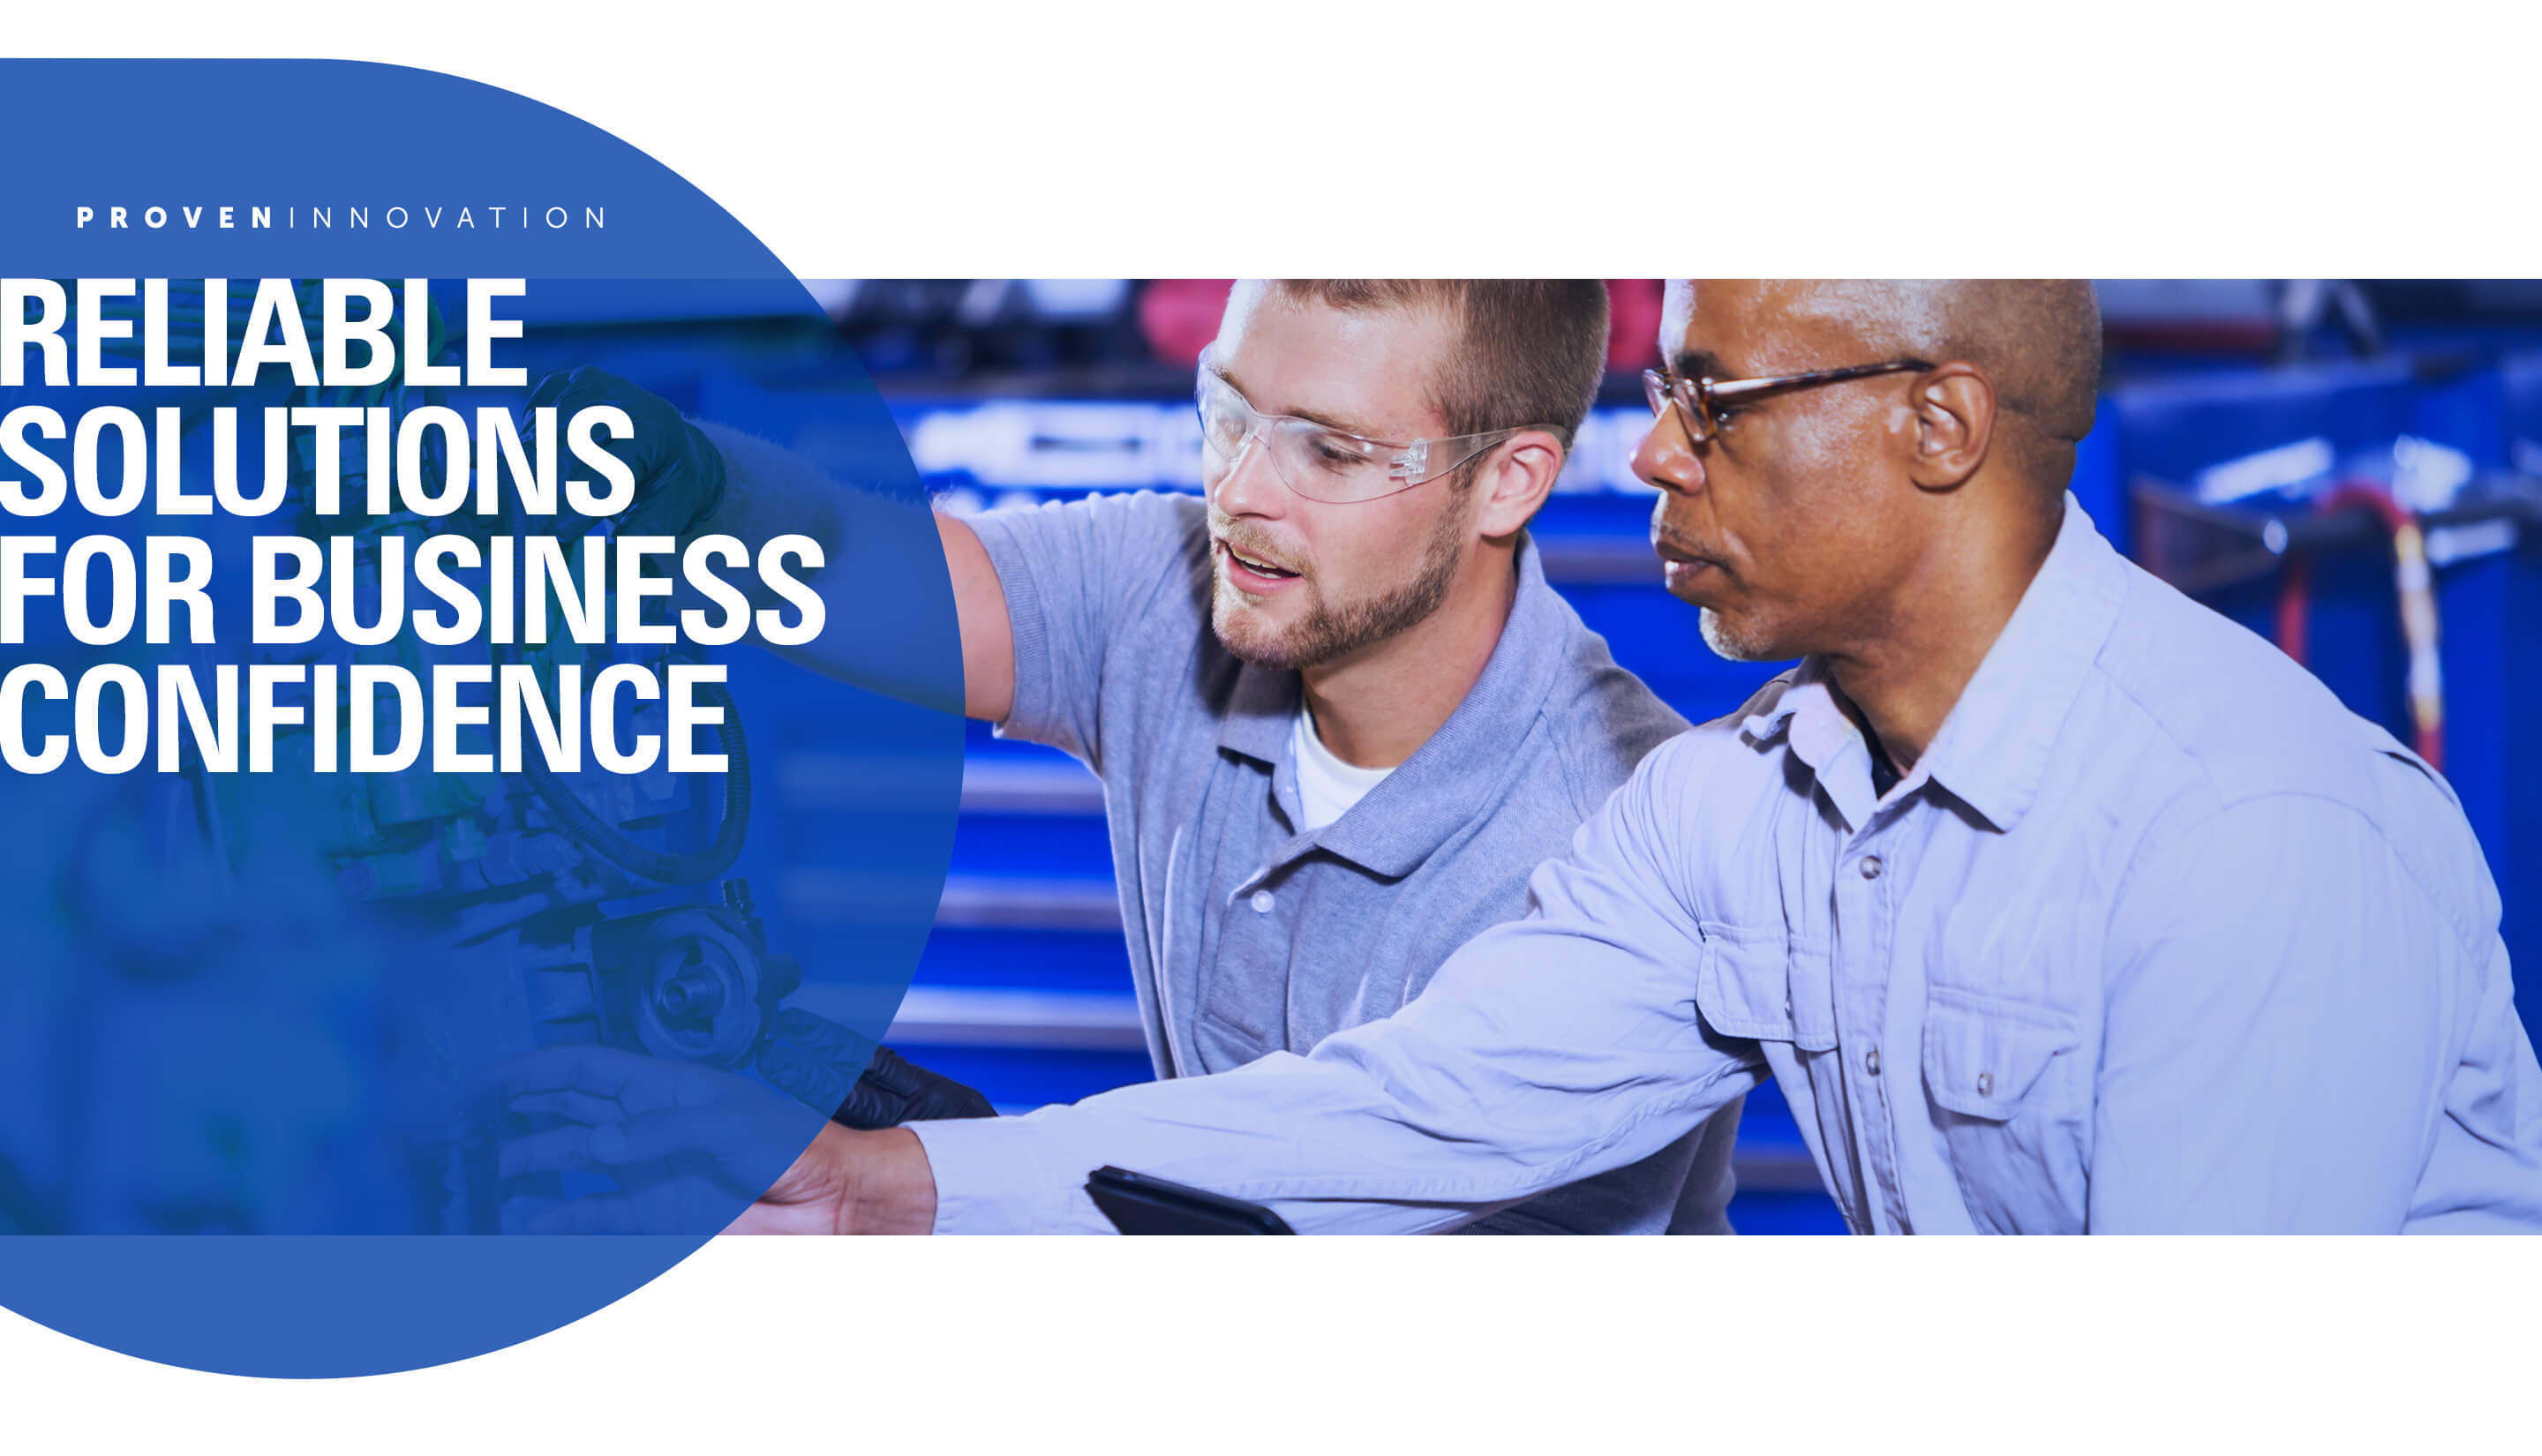 Reliable Solutions for Business Confidence